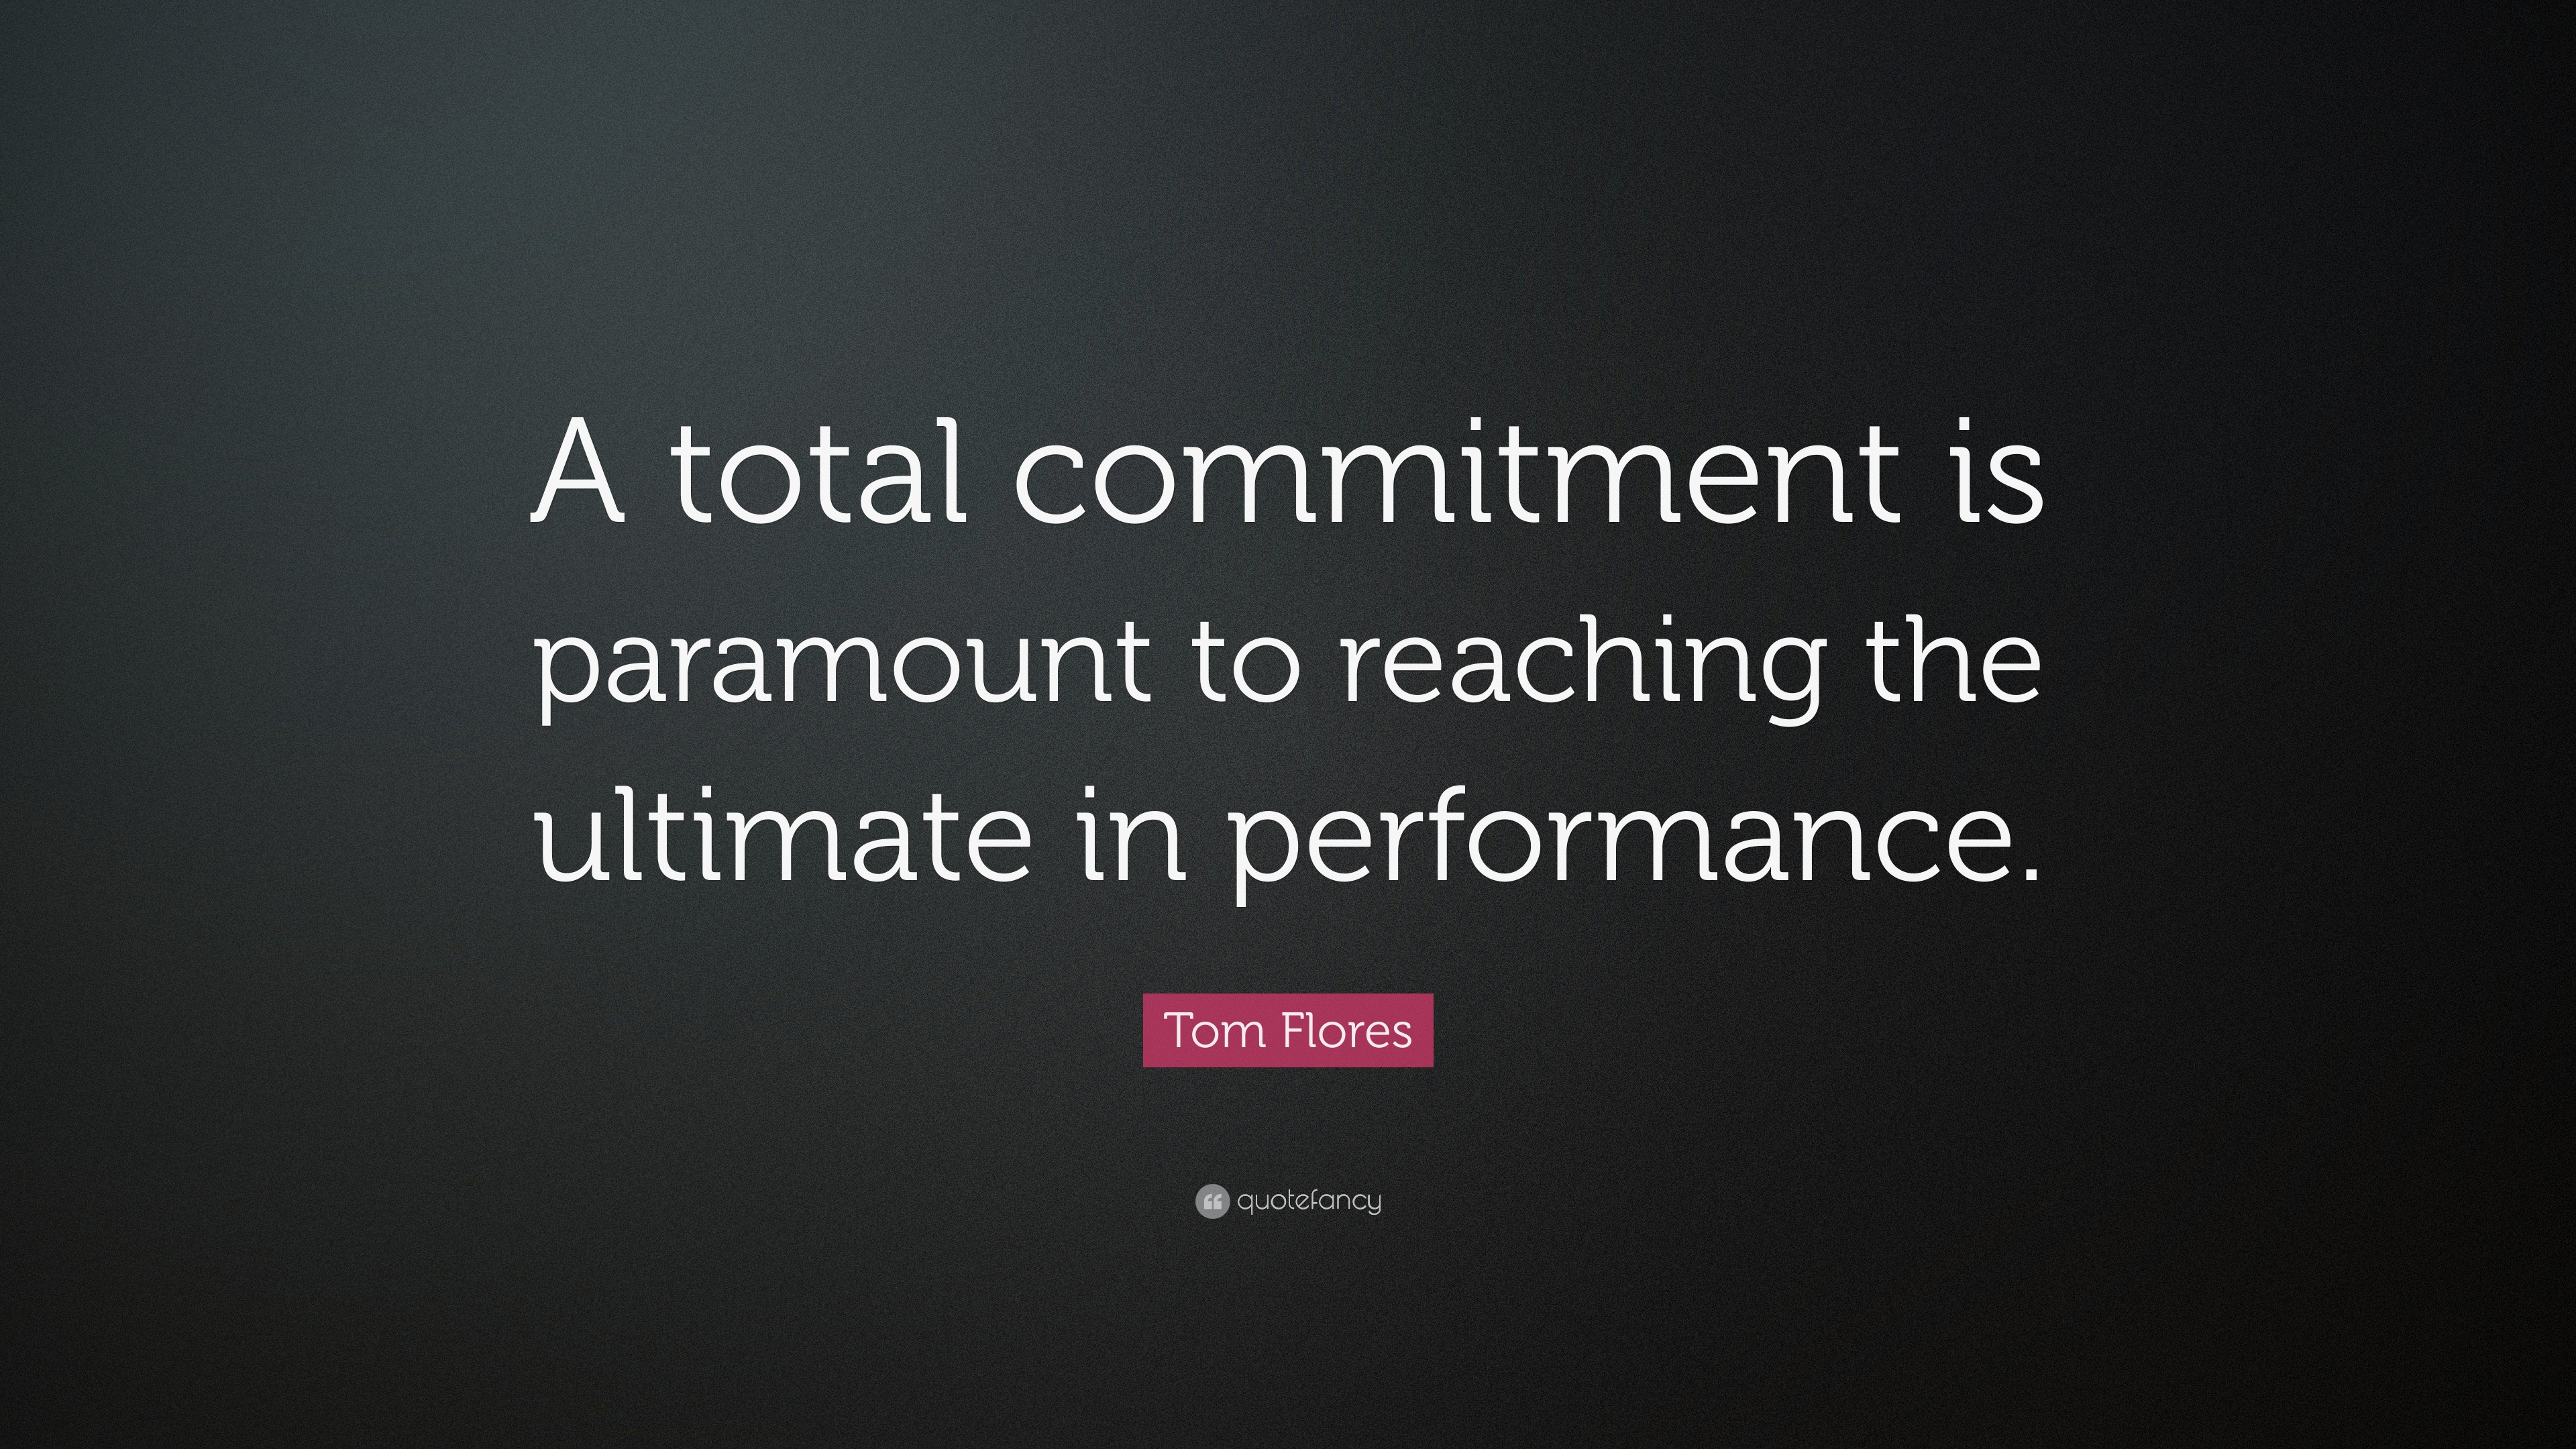 Tom Flores Quote: “A total commitment is paramount to reaching the ...